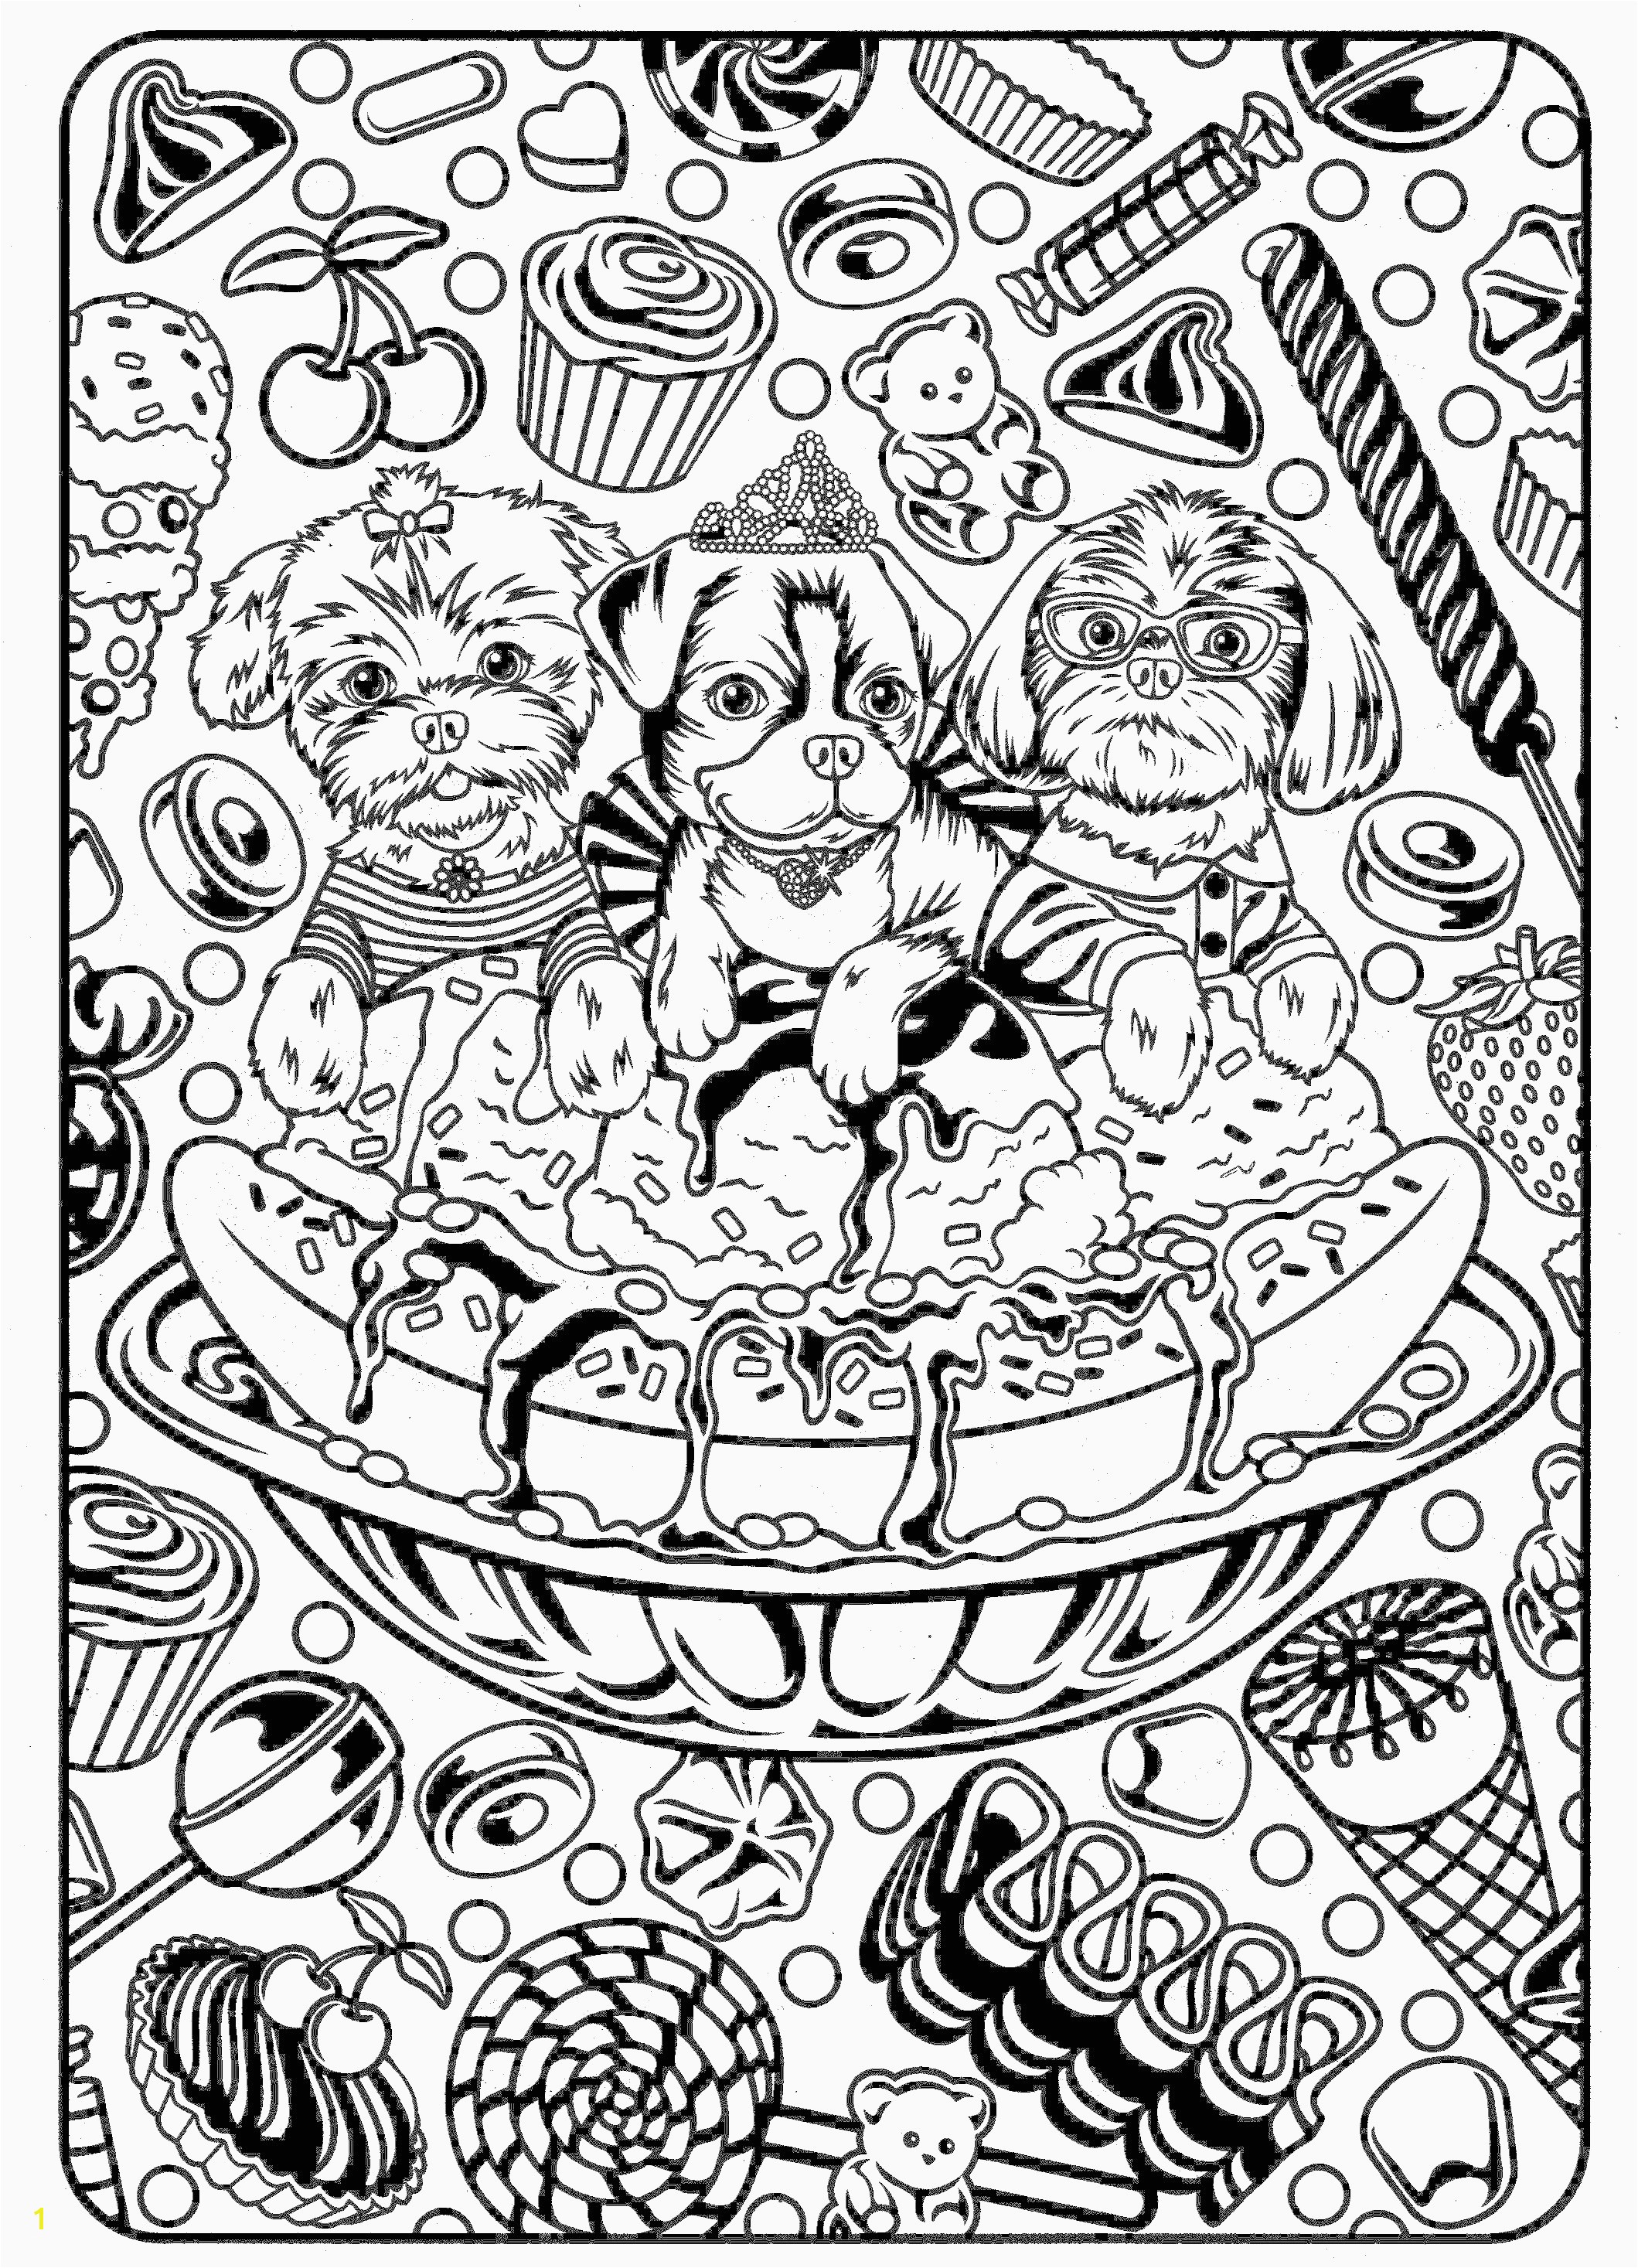 Seahawk Coloring Pages Luxury Tmnt Coloring Pages Coloring Pages